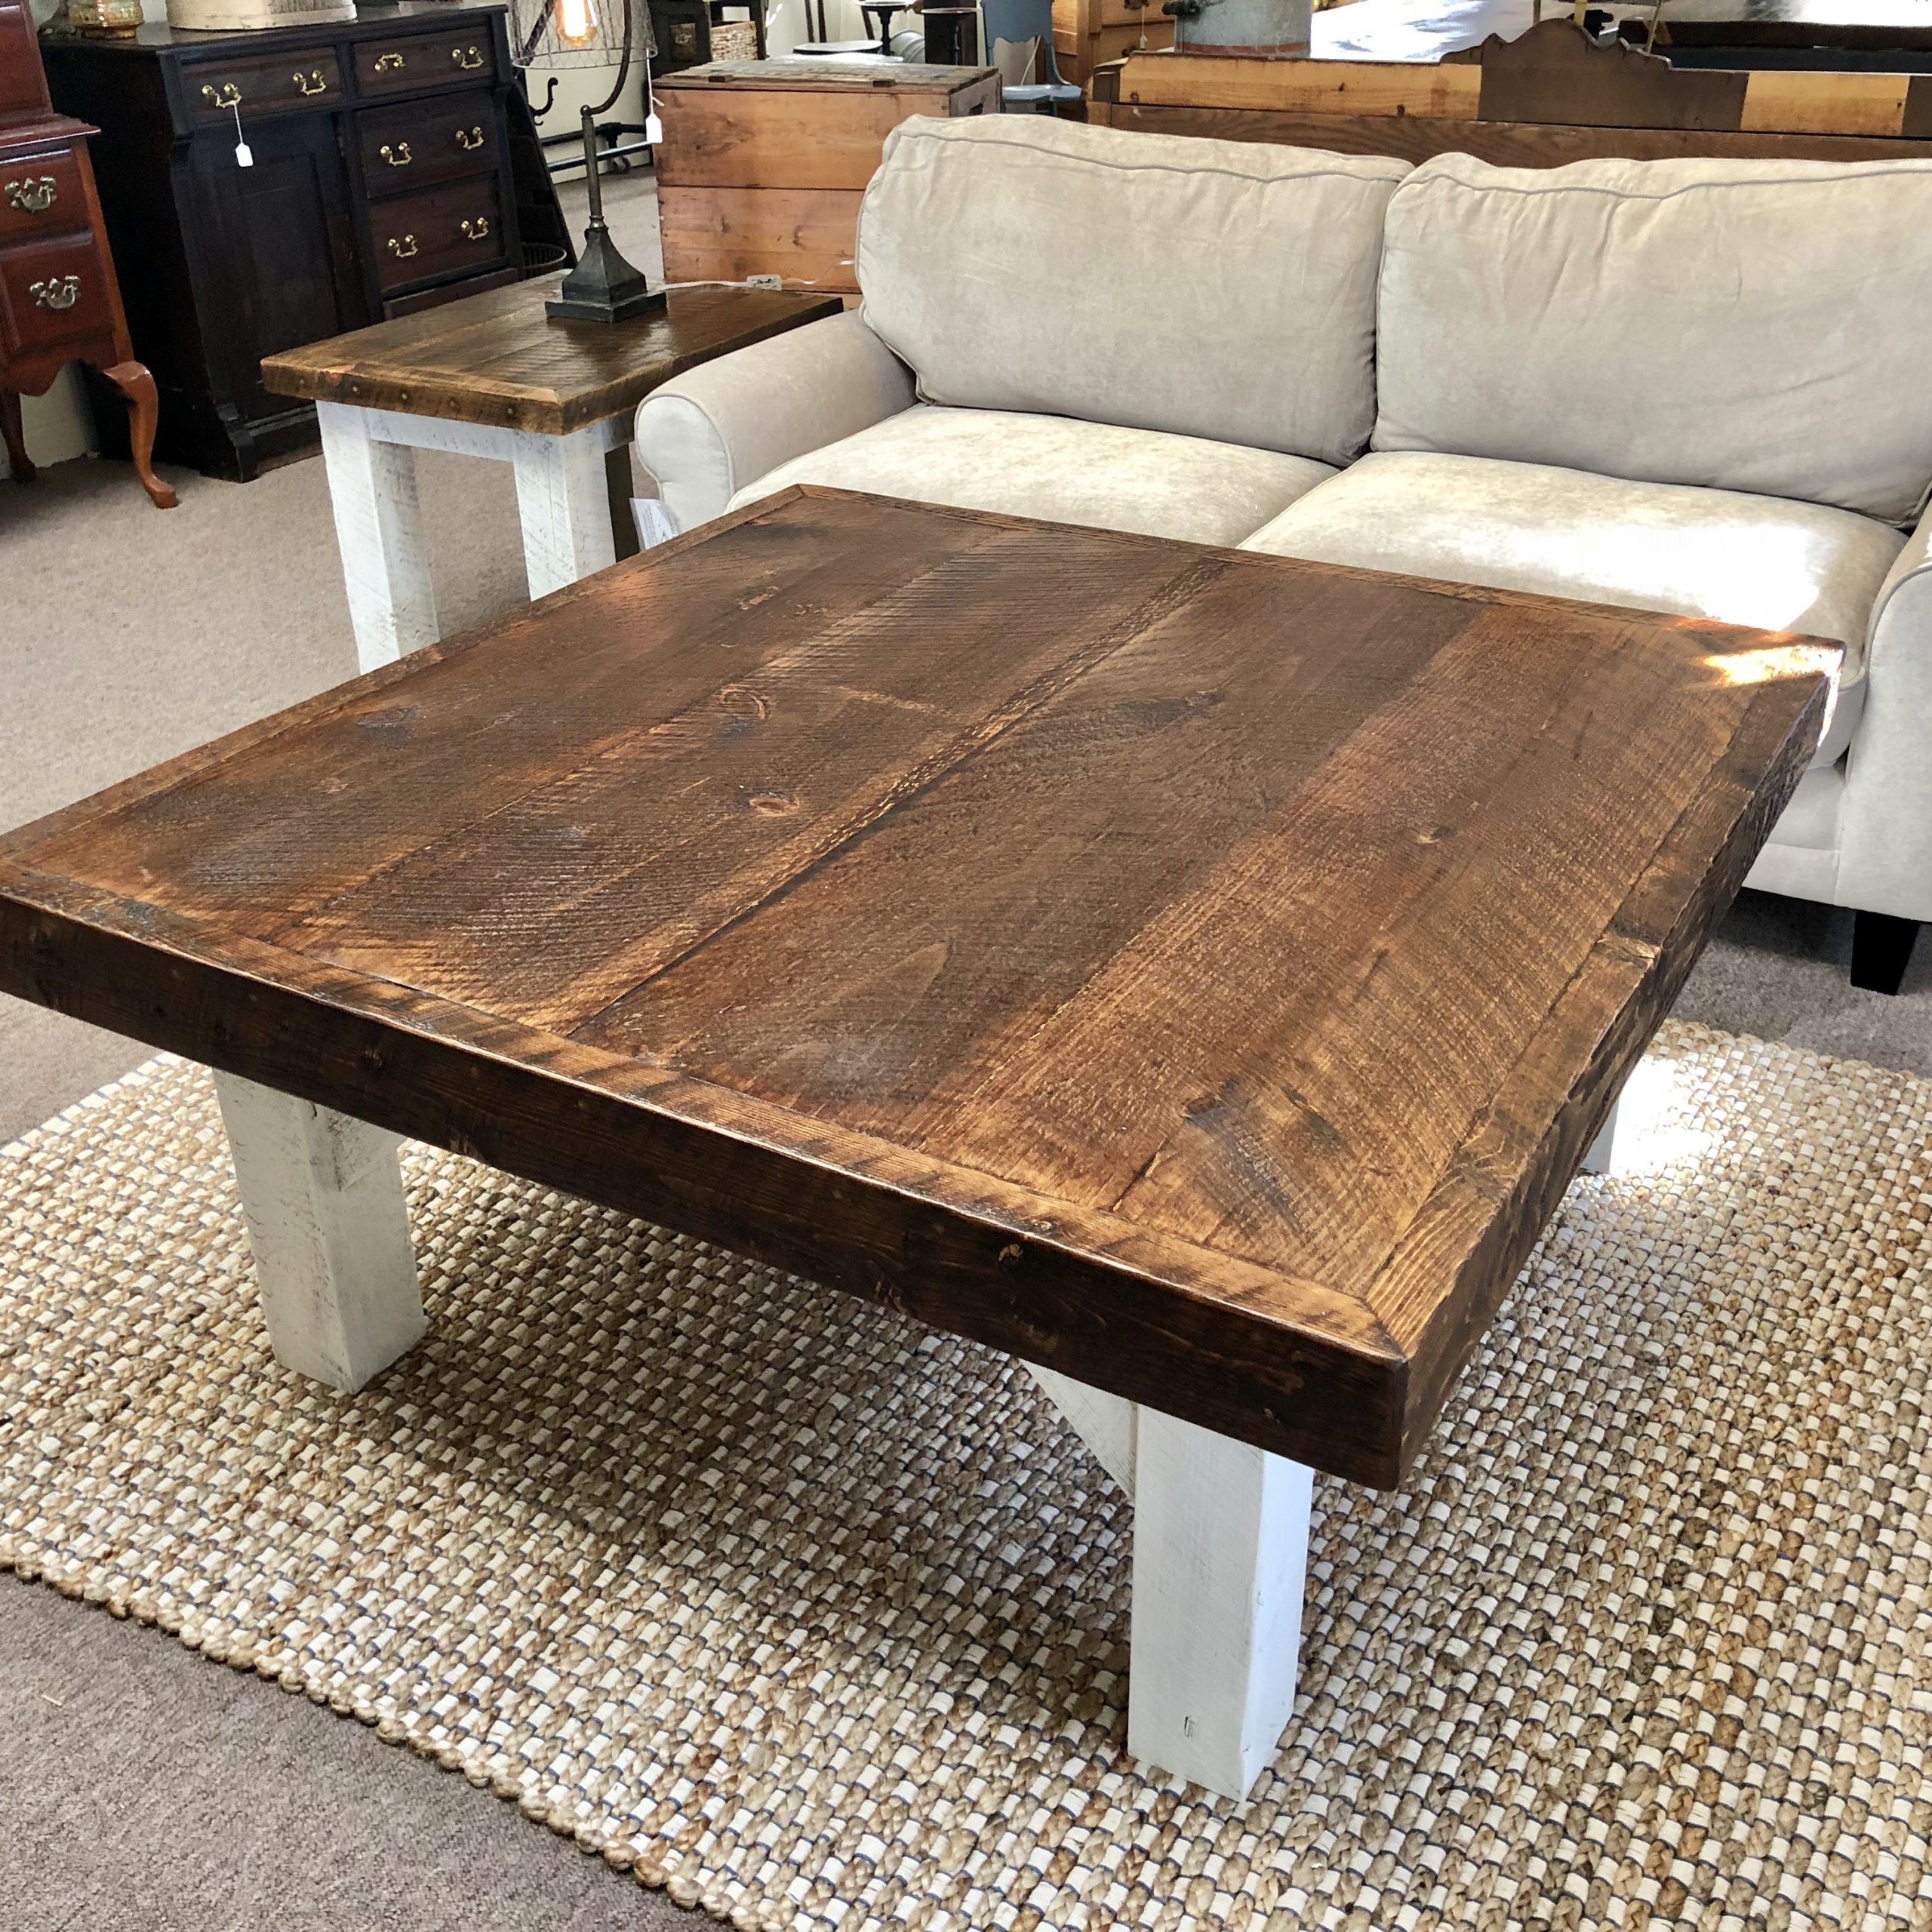 Preferred Rustic Square Coffee Table – Chic & Antique With Regard To 1 Shelf Square Coffee Tables (View 1 of 20)